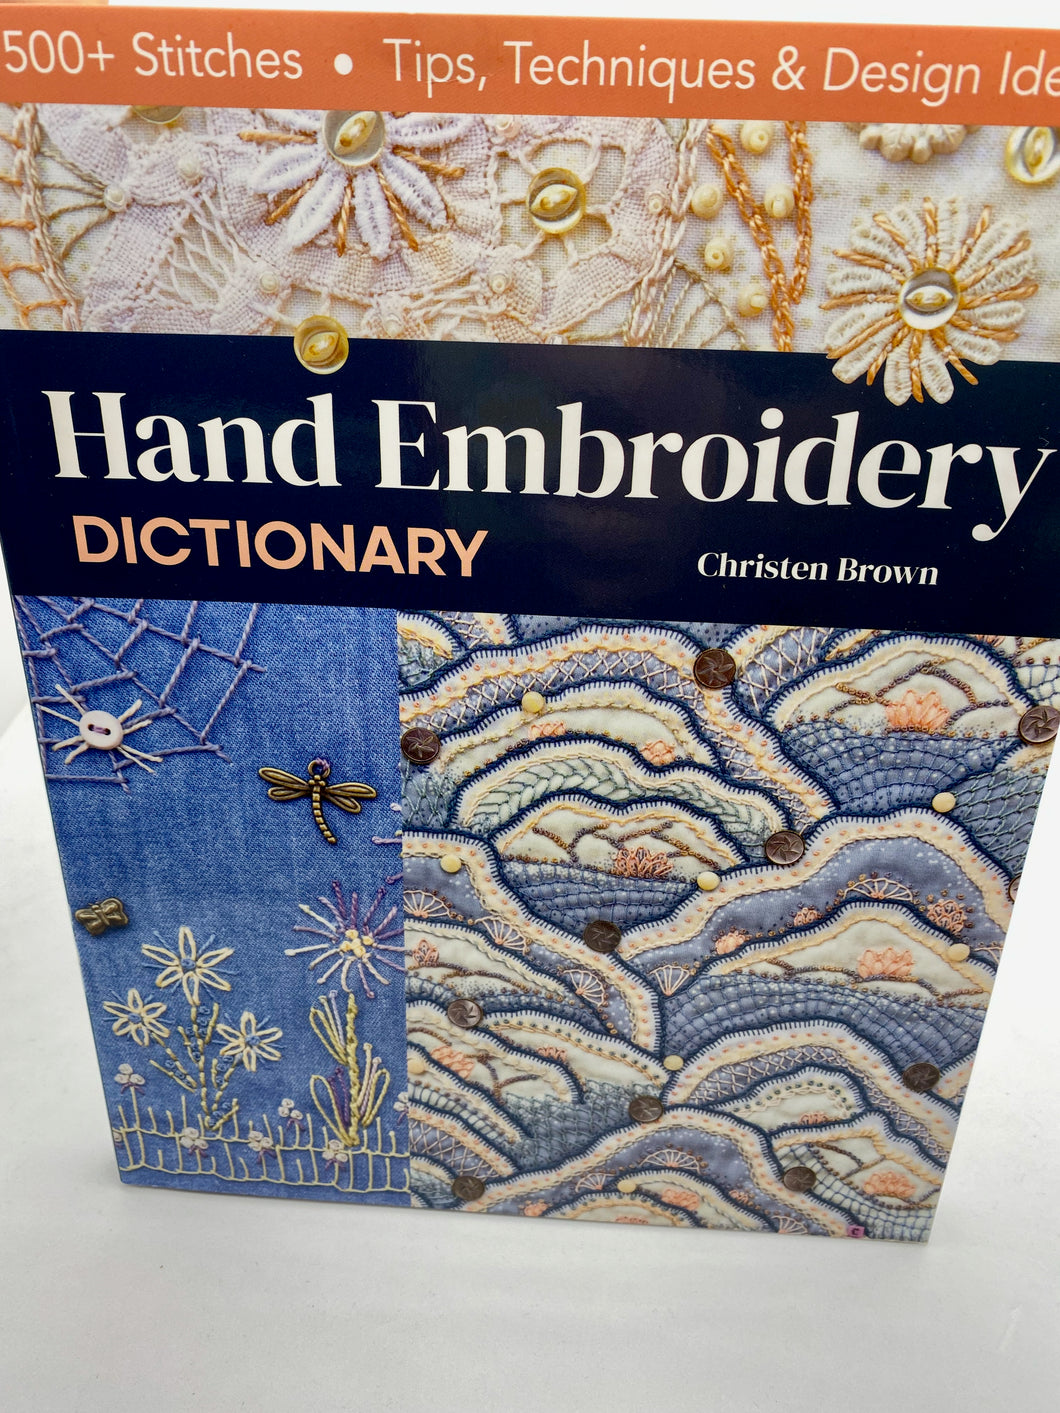 Hand Embroidery Dictionary by Christen Brown